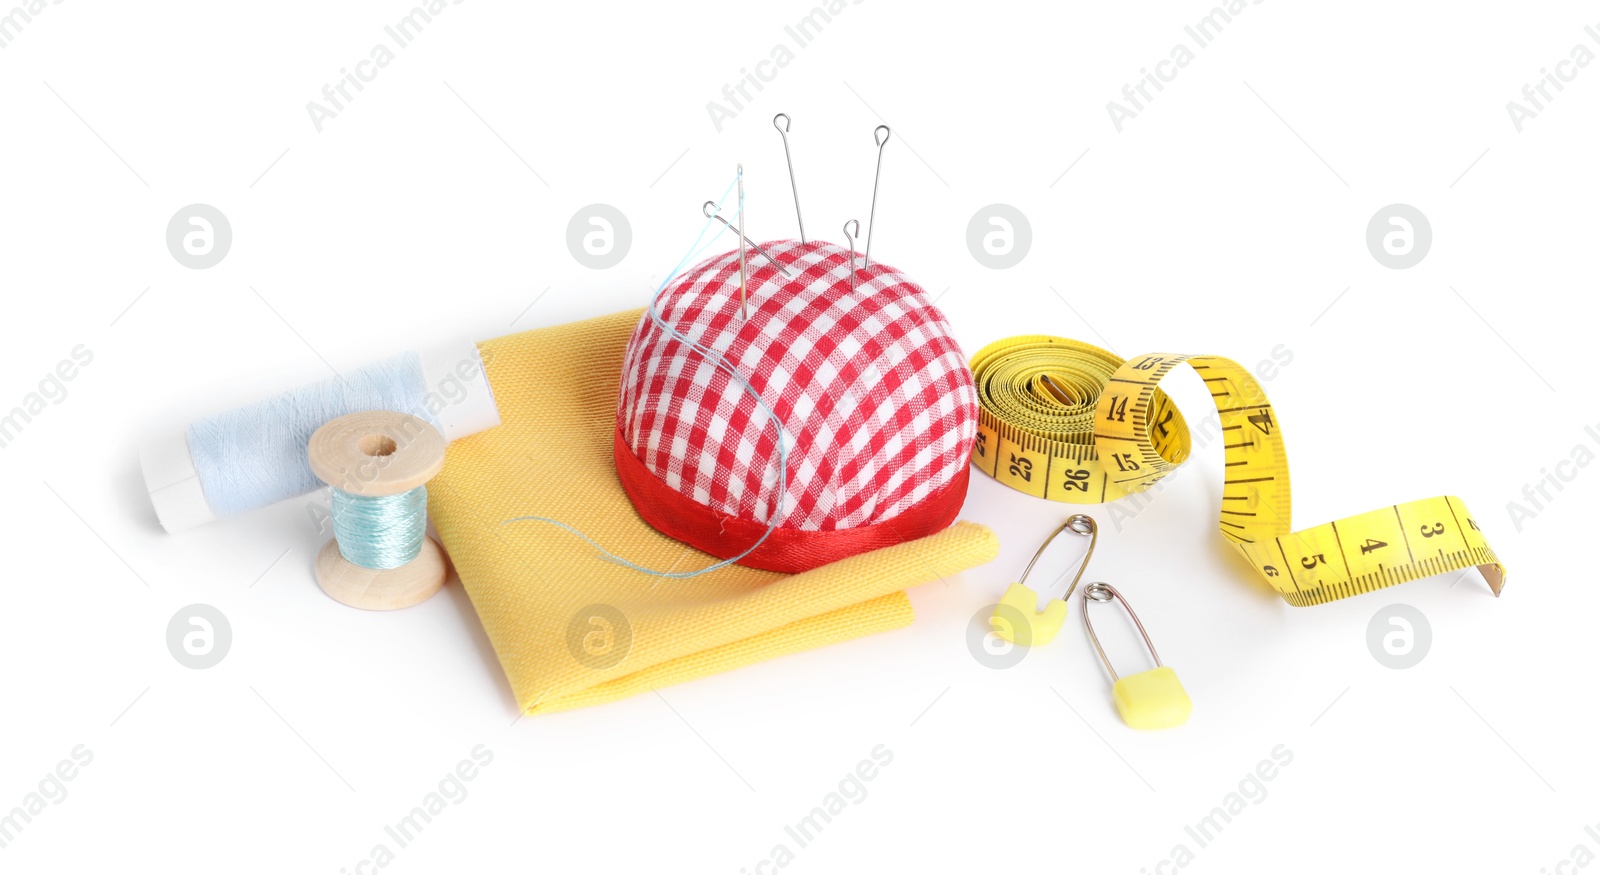 Photo of Pincushion, needles and other sewing tools isolated on white